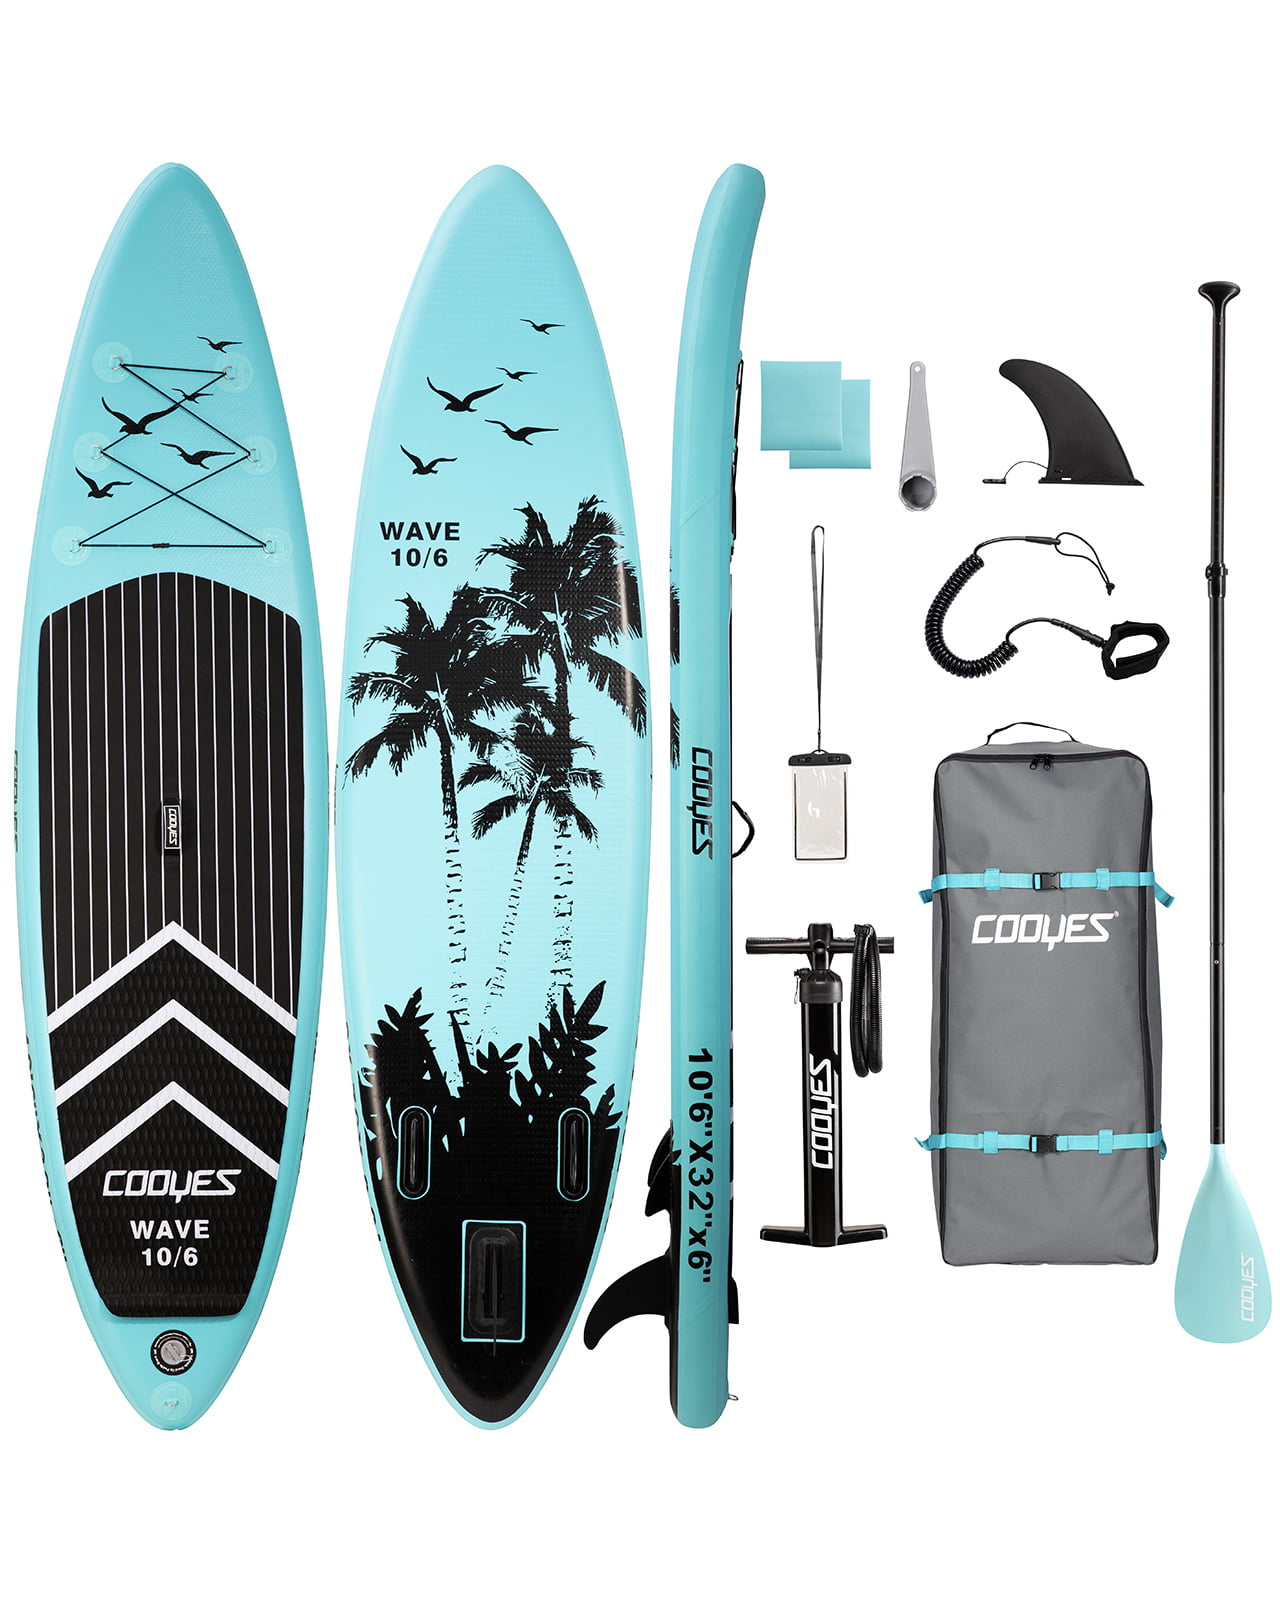 Hand Pump Leash and Bonus Waterproof Bag Paddle. GORPORE Stand Up Paddle Board Inflatable SUP 10'6 ft with Non-Slip Deck,Free Premium SUP Accessories & Backpack 